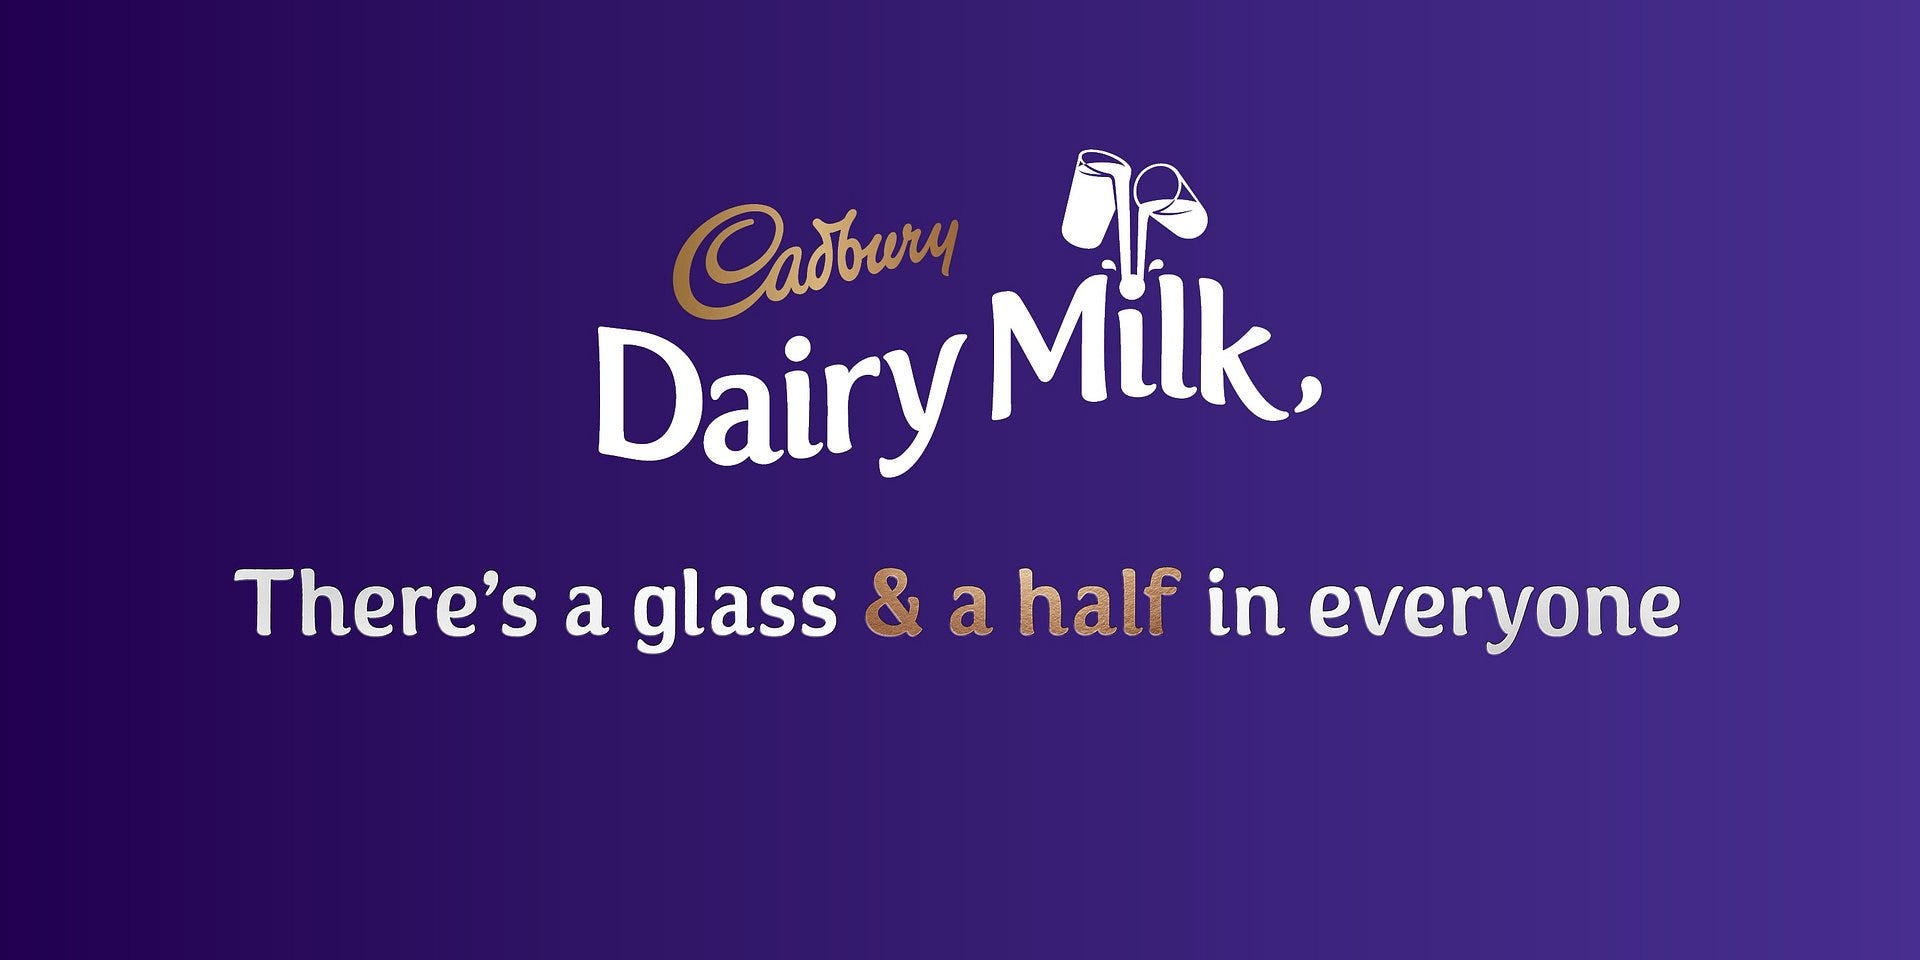 Cadbury Dairy Milk, There's a glass & a half of Generosity in everyone